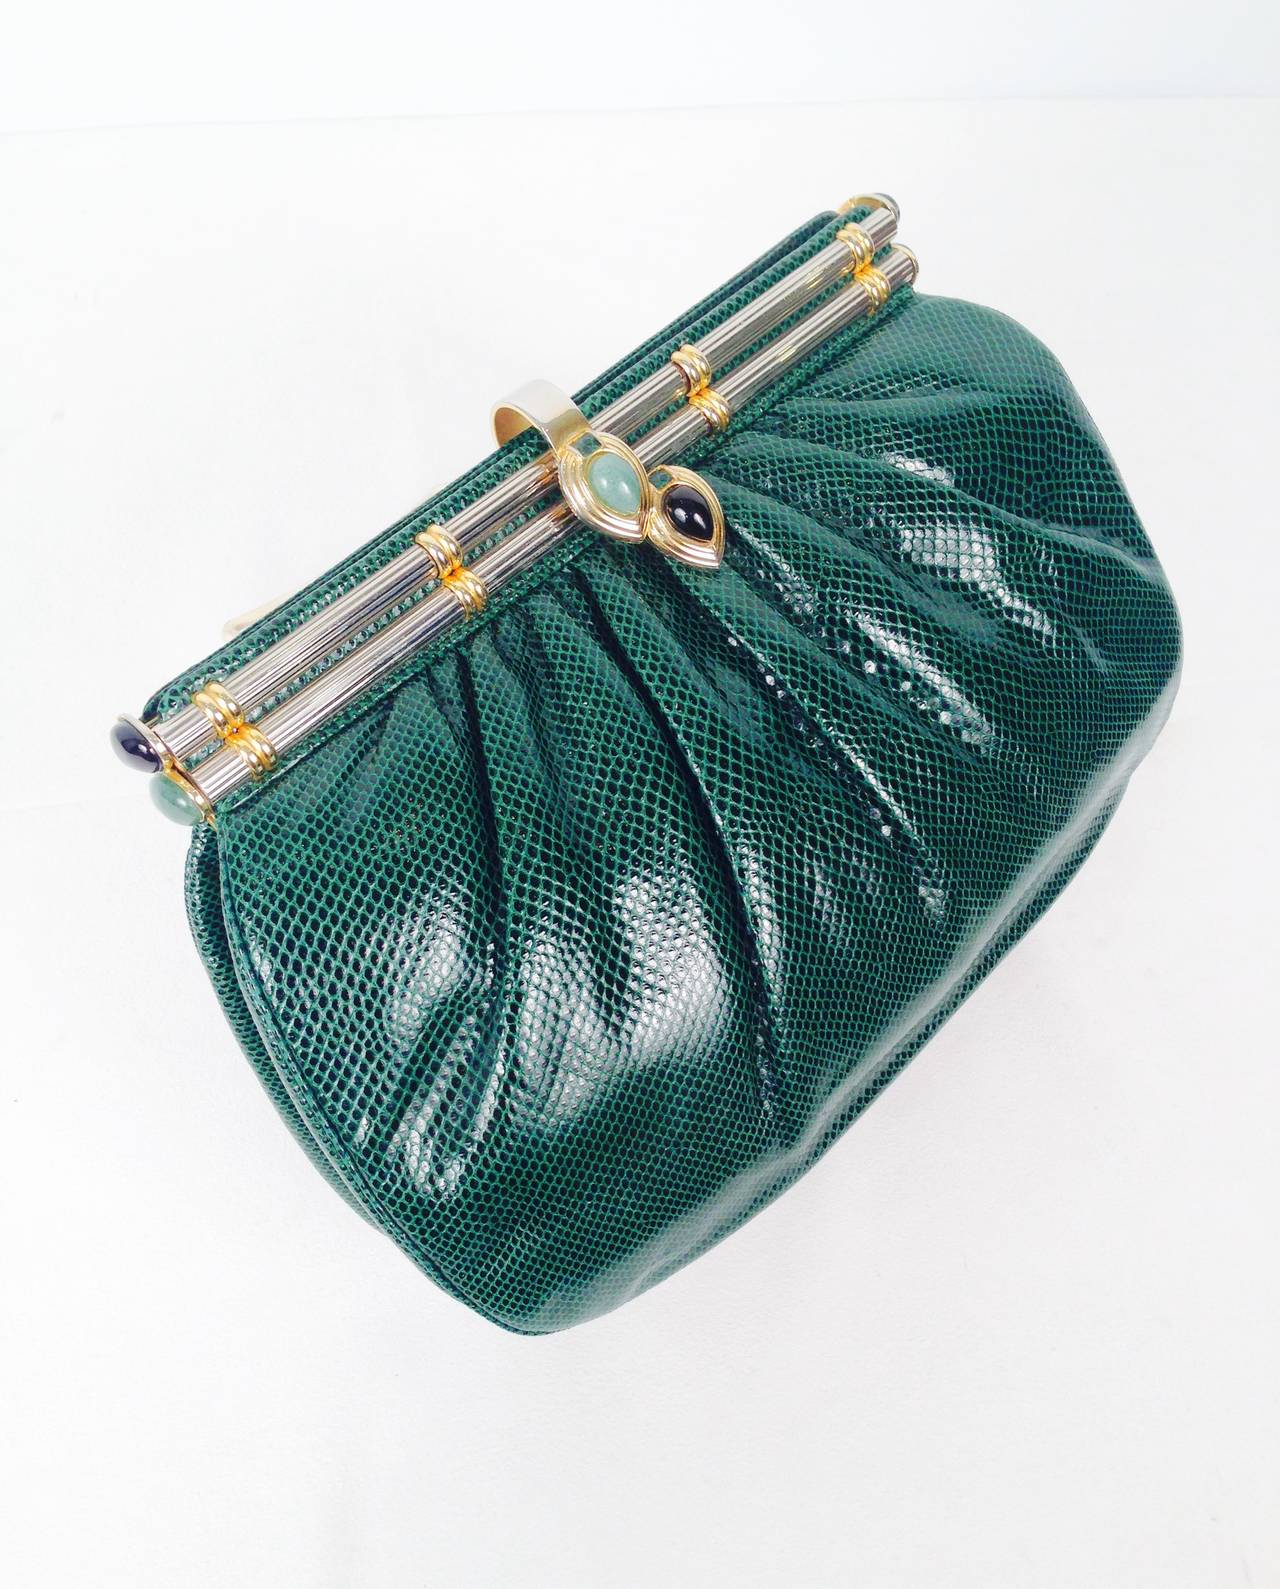 Vintage Emerald Lizard Evening Bag is highly desired by all collectors of Judith Leiber! Features slightly gathered, butter-soft lizard skin. Bag easily converts from clutch to shoulder bag using lizard strap with minimal effort! Forgiving gusset